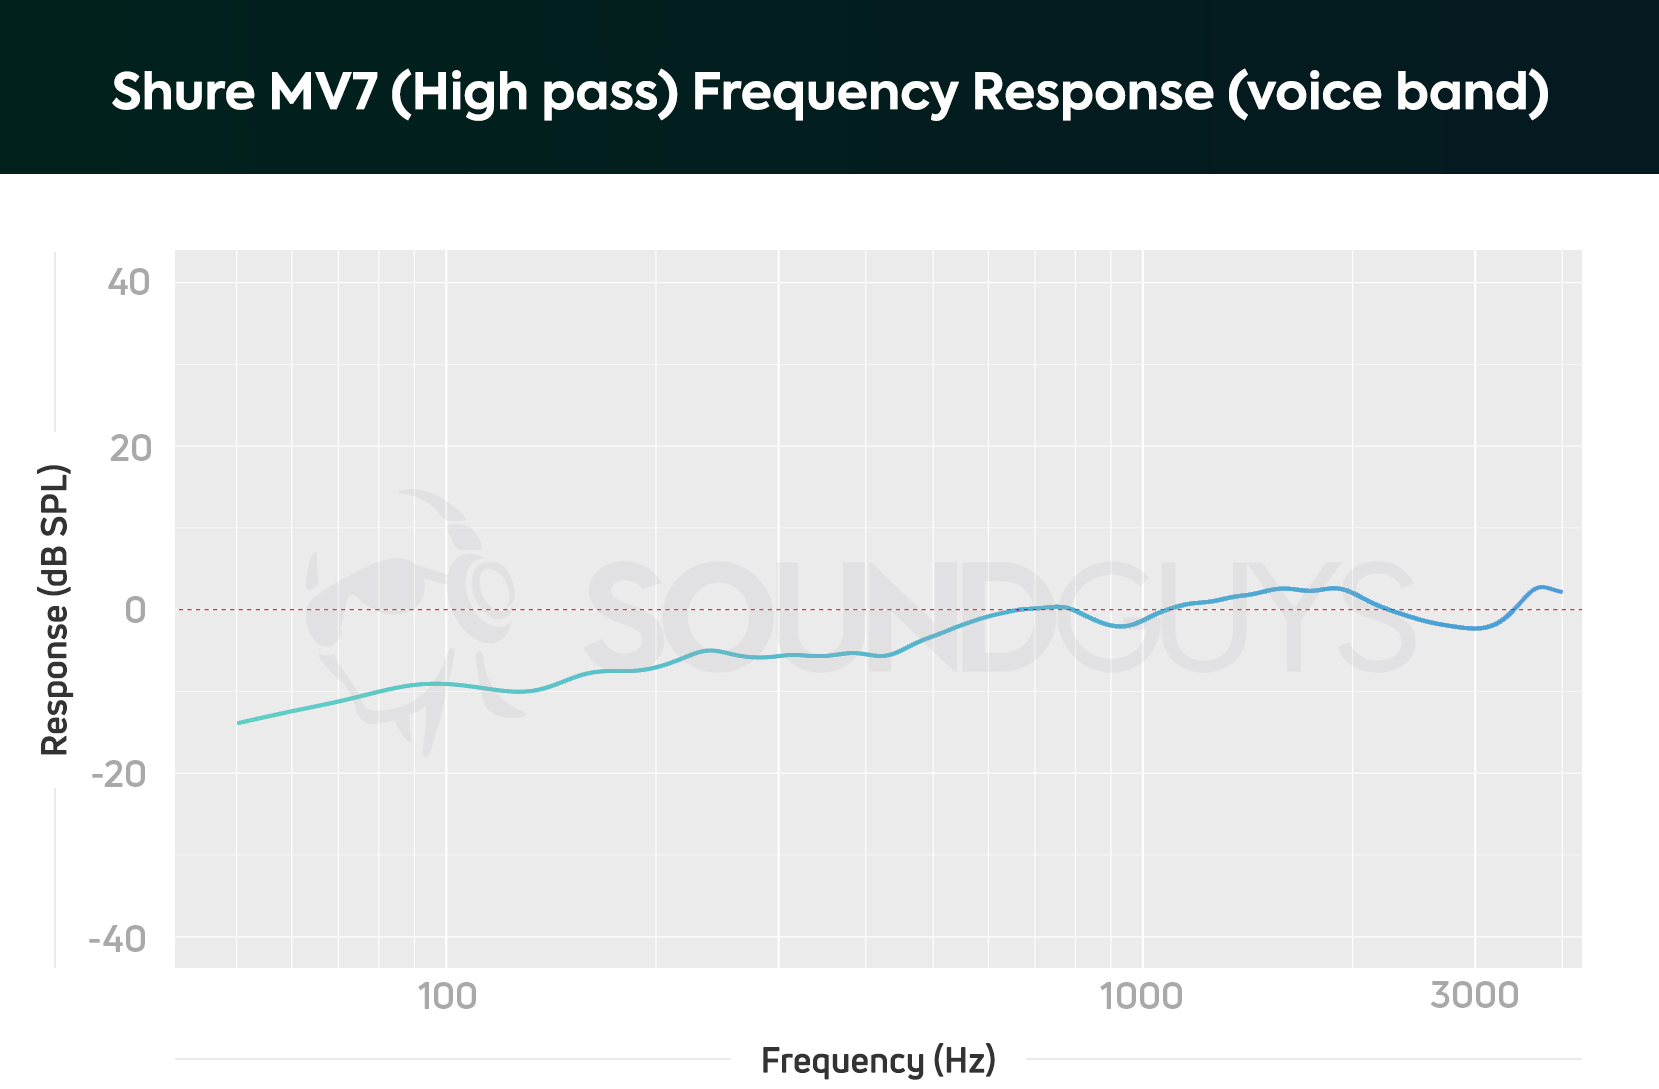 A chart of the Shure MV7 USB microphone frequency response in manual mode with the high pass EQ selected; bass notes are slightly de-emphasized, and treble notes hug the dotted red line which represents the platonic ideal.